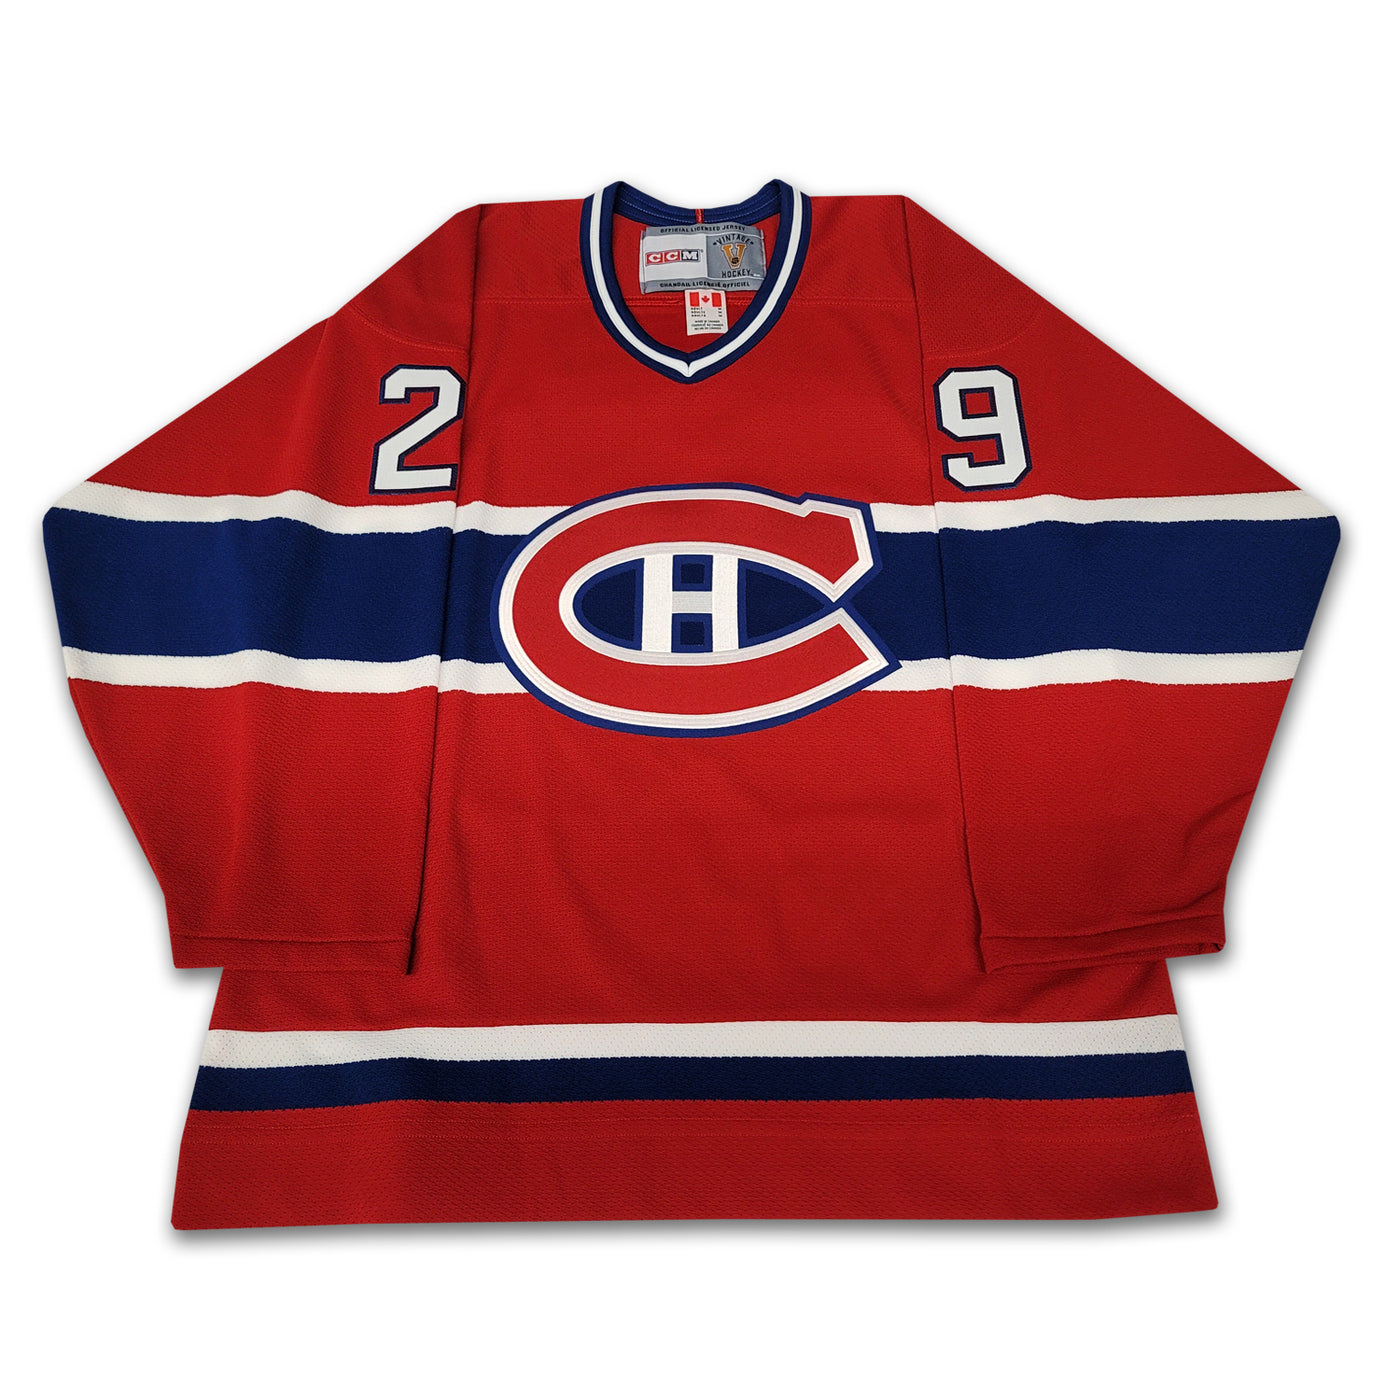 Gino Odjick Montreal Canadiens Red CCM Jersey